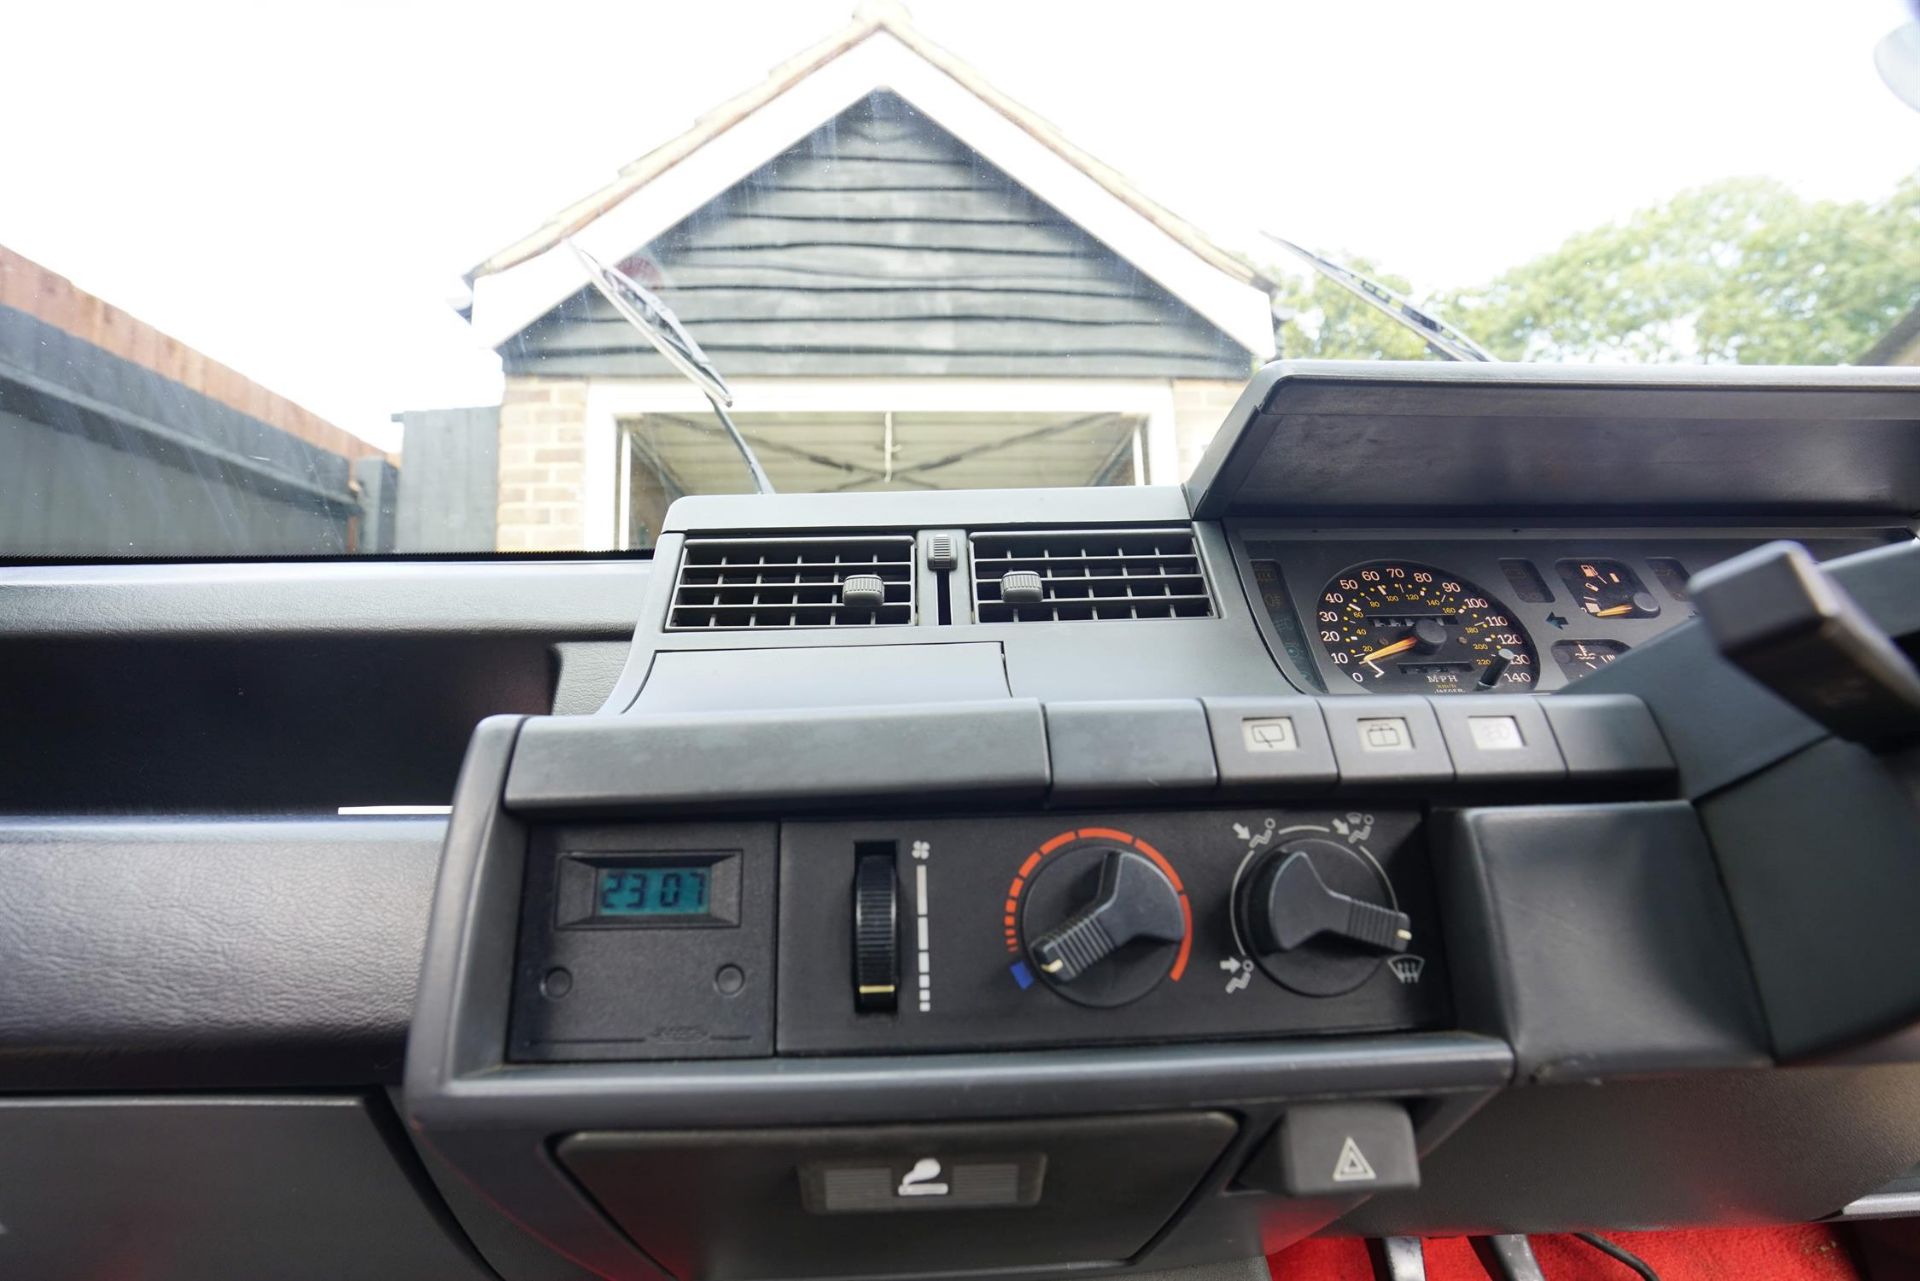 1988 Renault 5 GT Turbo Phase 2 - Image 10 of 10